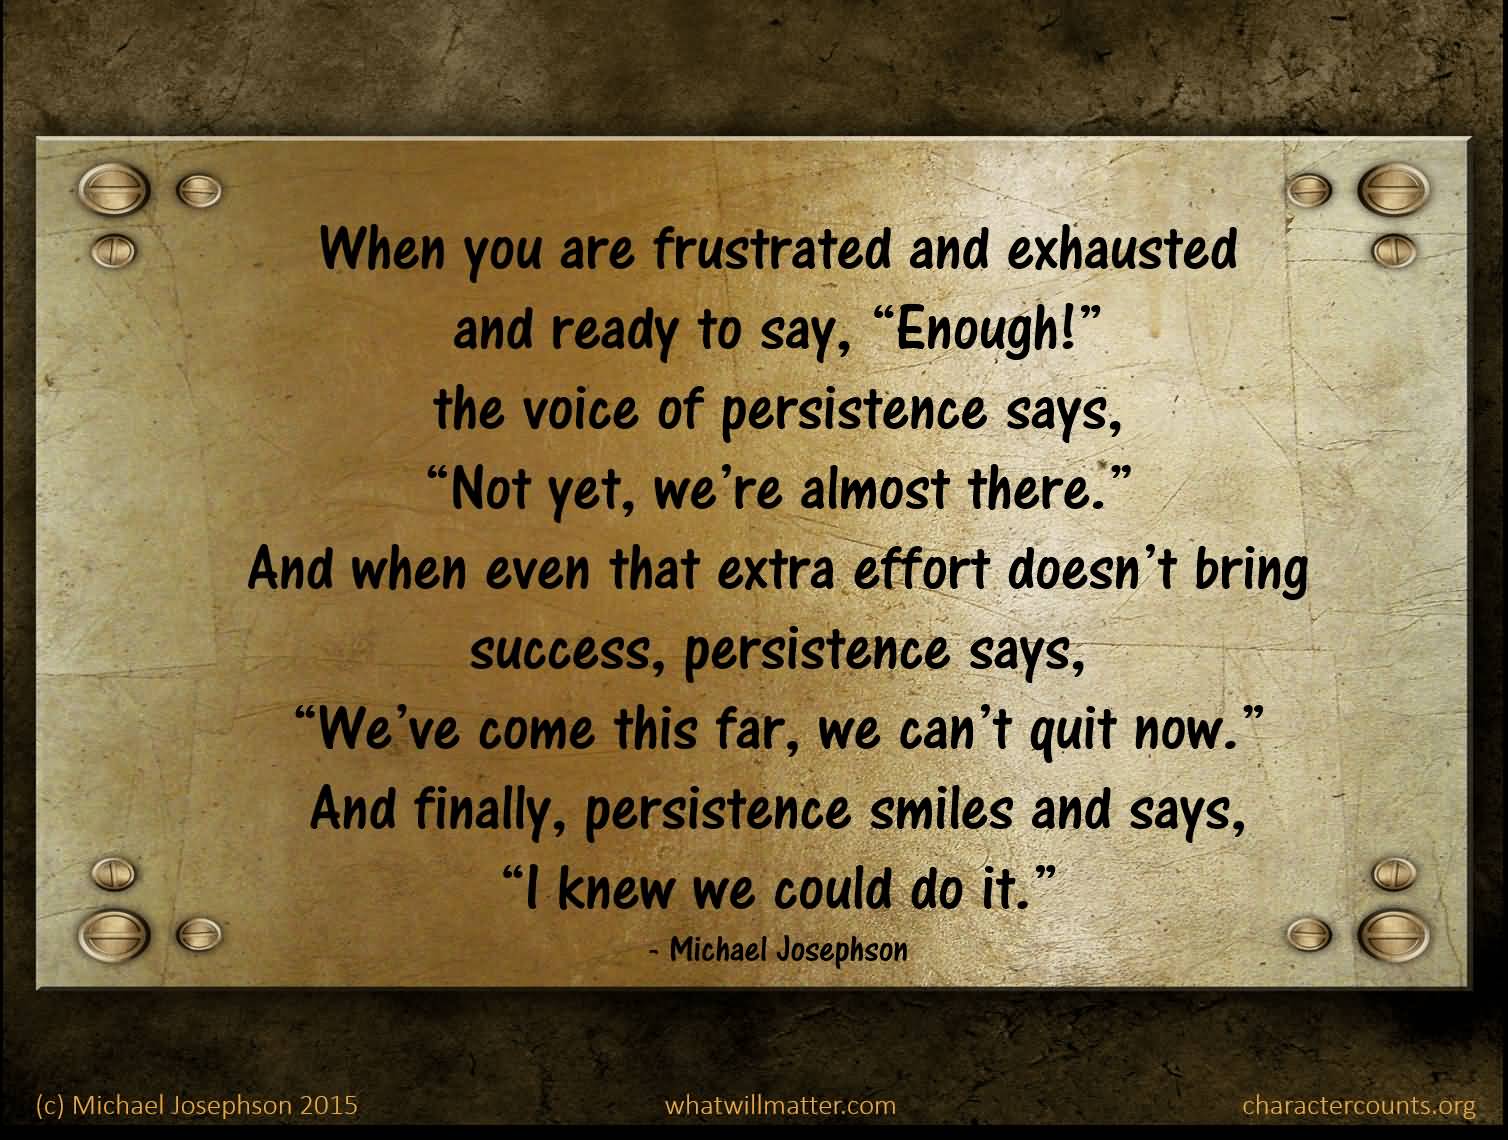 When you are frustrated and exhausted and ready to say 'enough!' the voice of persistence says, 'Not yet, we're almost there'. And when even... Michael Josephson